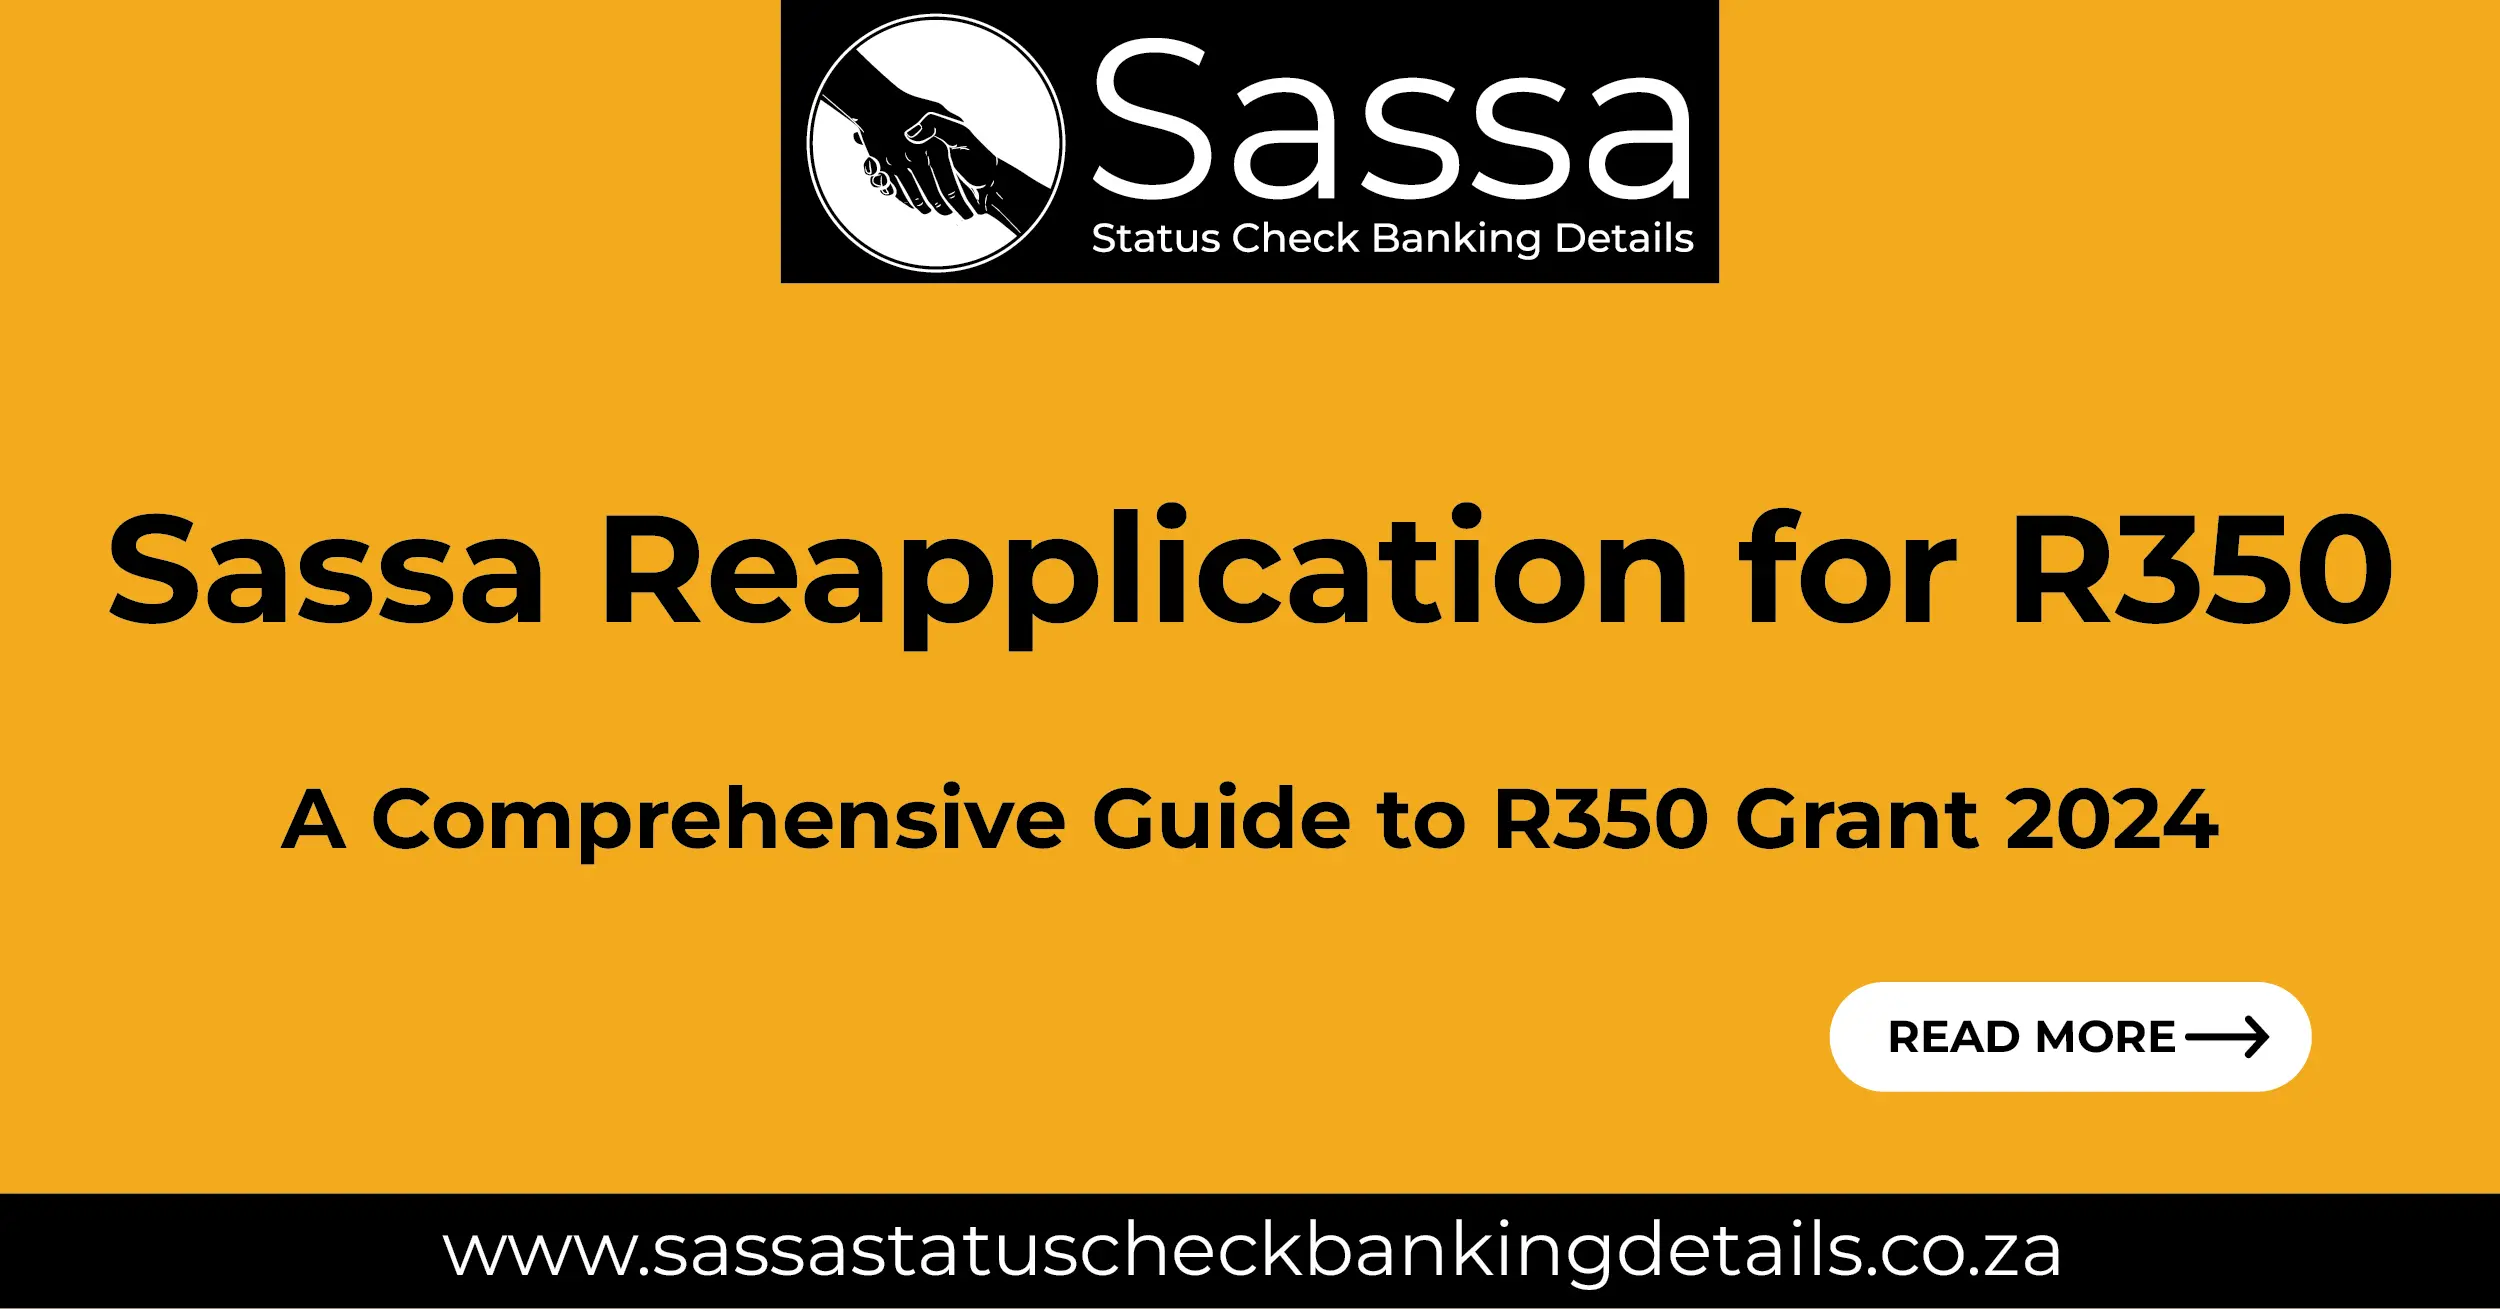 Sassa Reapplication for R350: A Comprehensive Guide to R350 Grant 2024